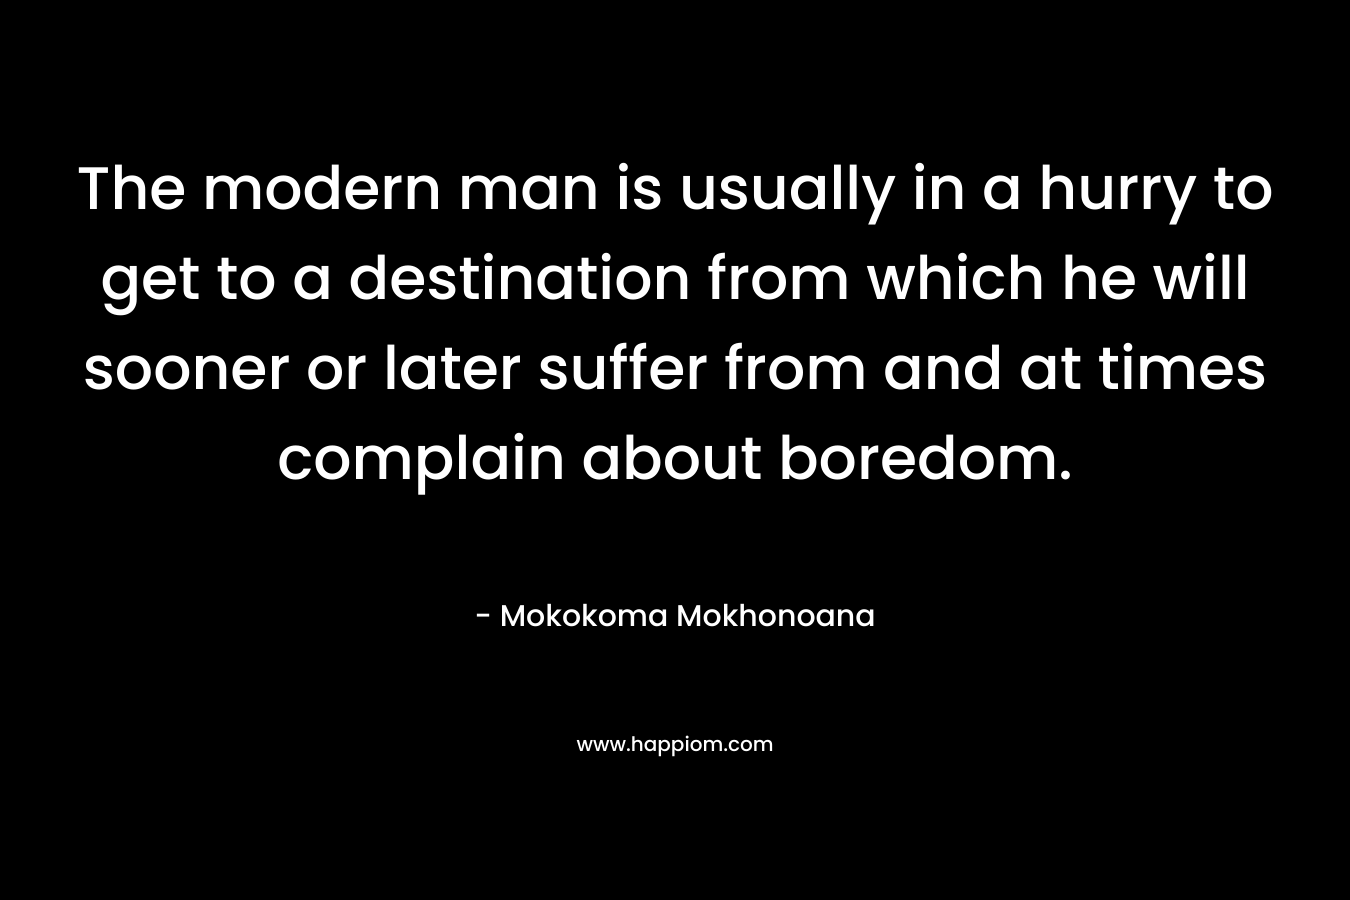 The modern man is usually in a hurry to get to a destination from which he will sooner or later suffer from and at times complain about boredom.